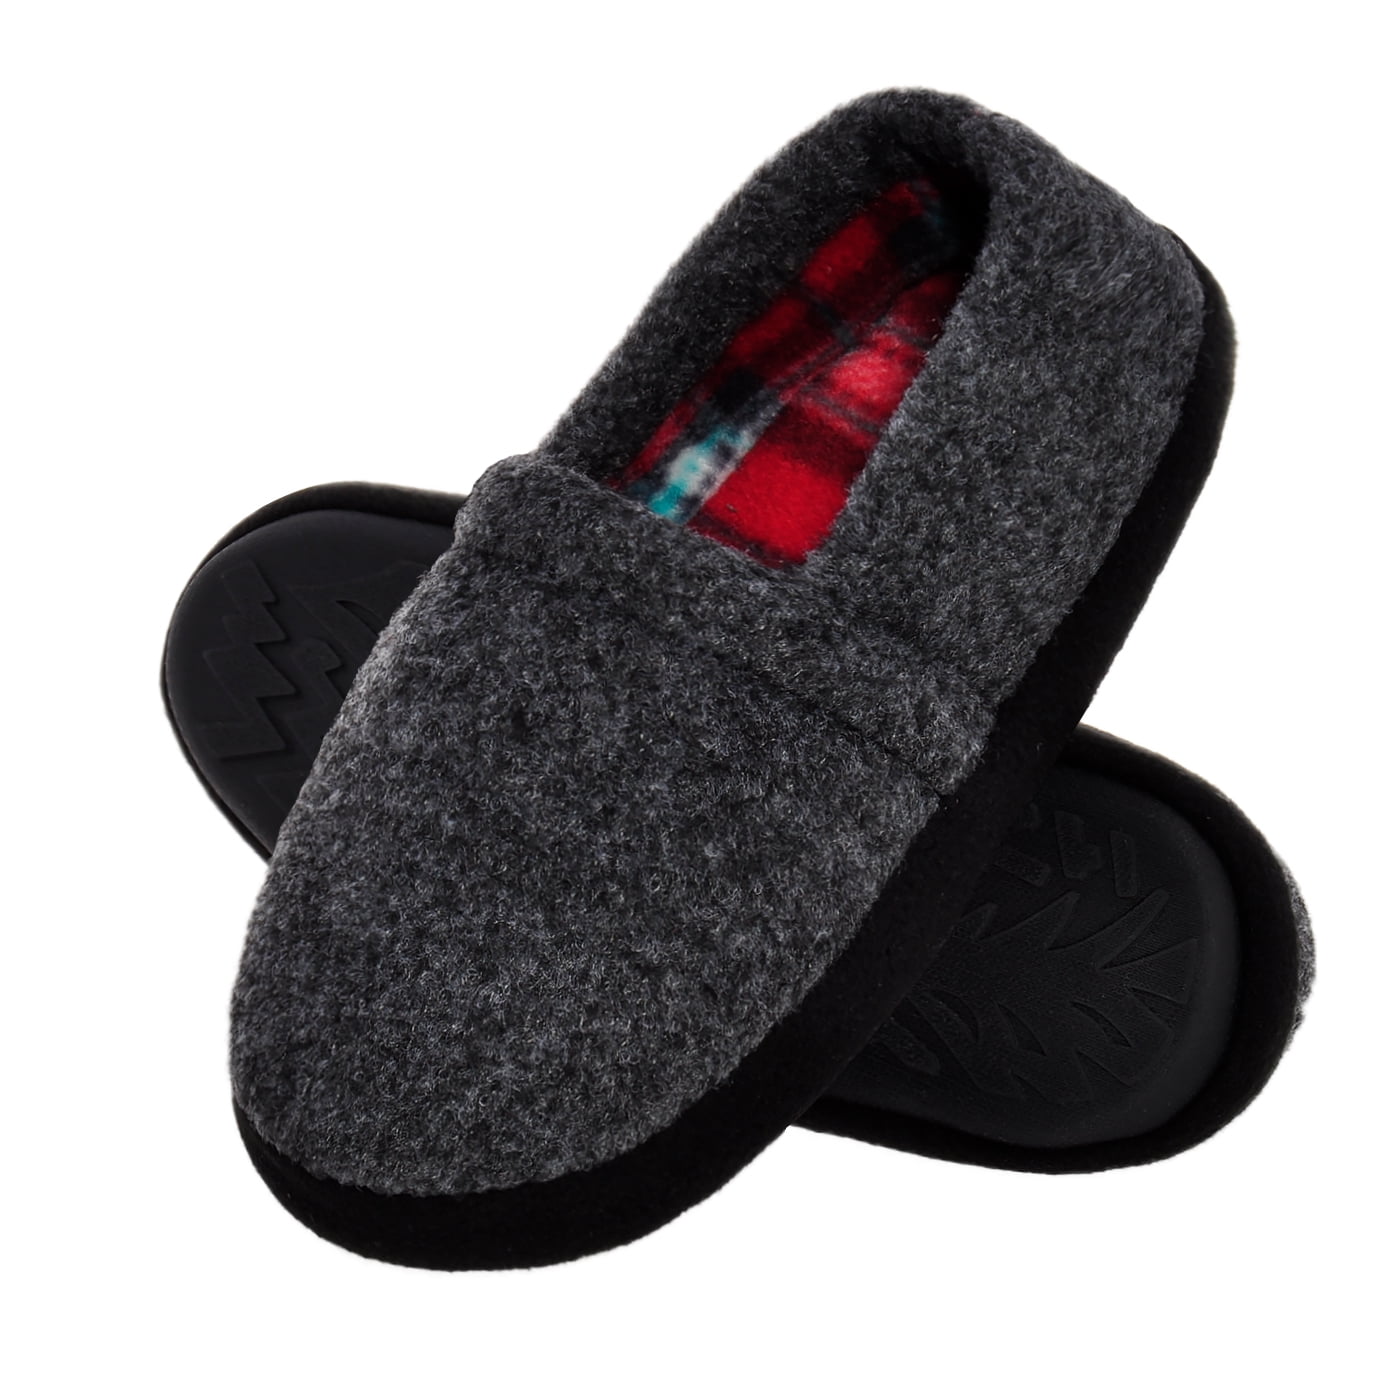 WONDER NATION BOYS PUFF INDOOR OUTDOOR BLACK SLIPPERS SHOES SIZE 4-5 FUR  LINED | eBay